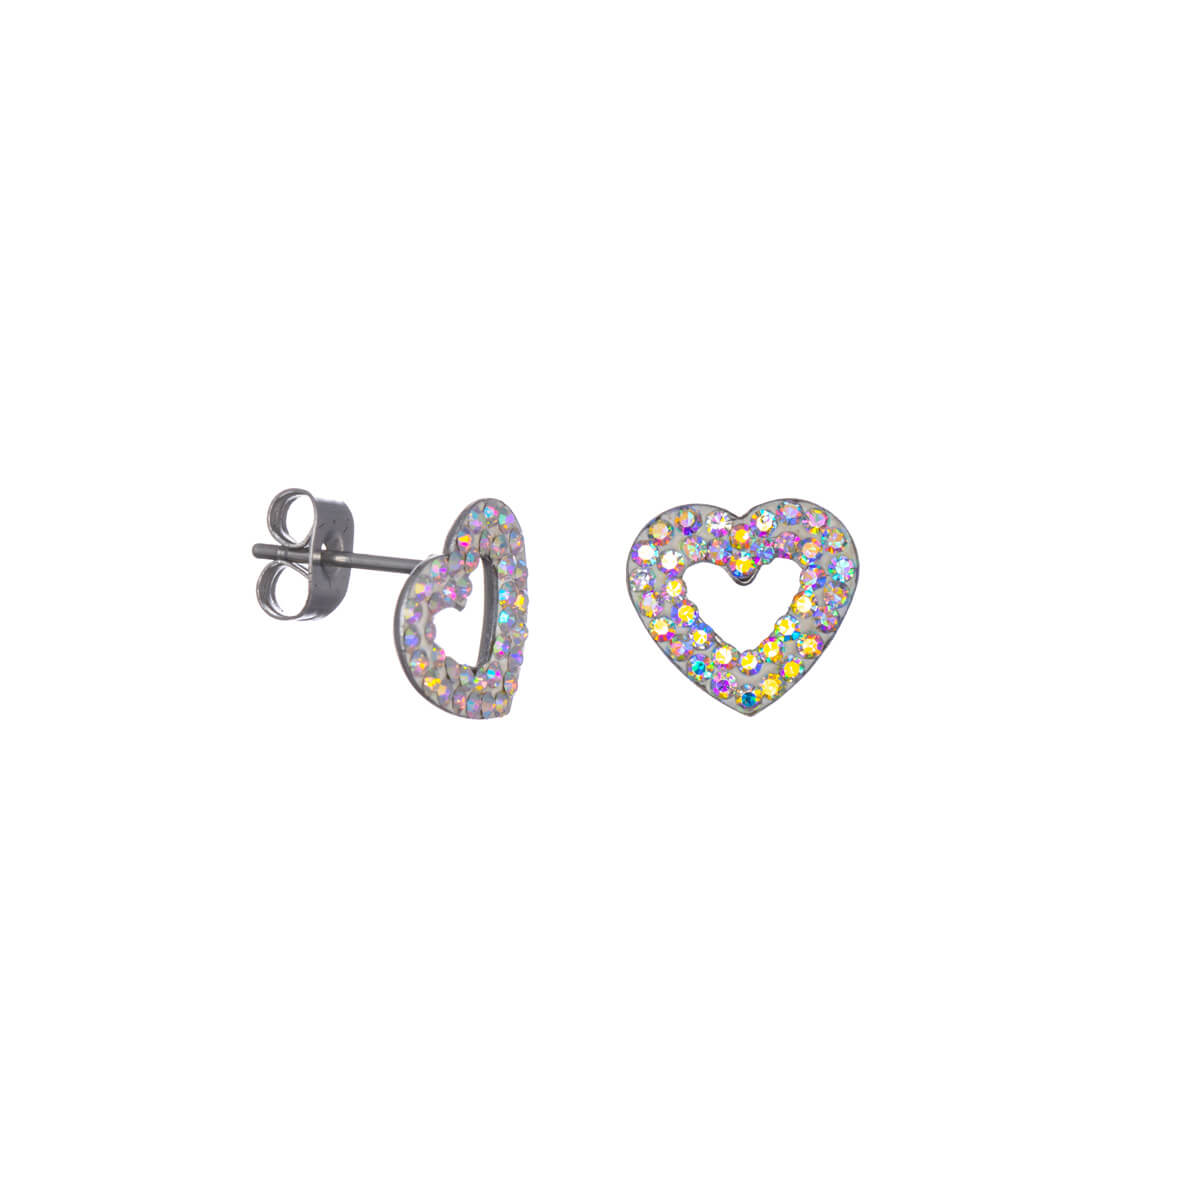 Sparkling heart earrings with glass stones (Steel 316L)